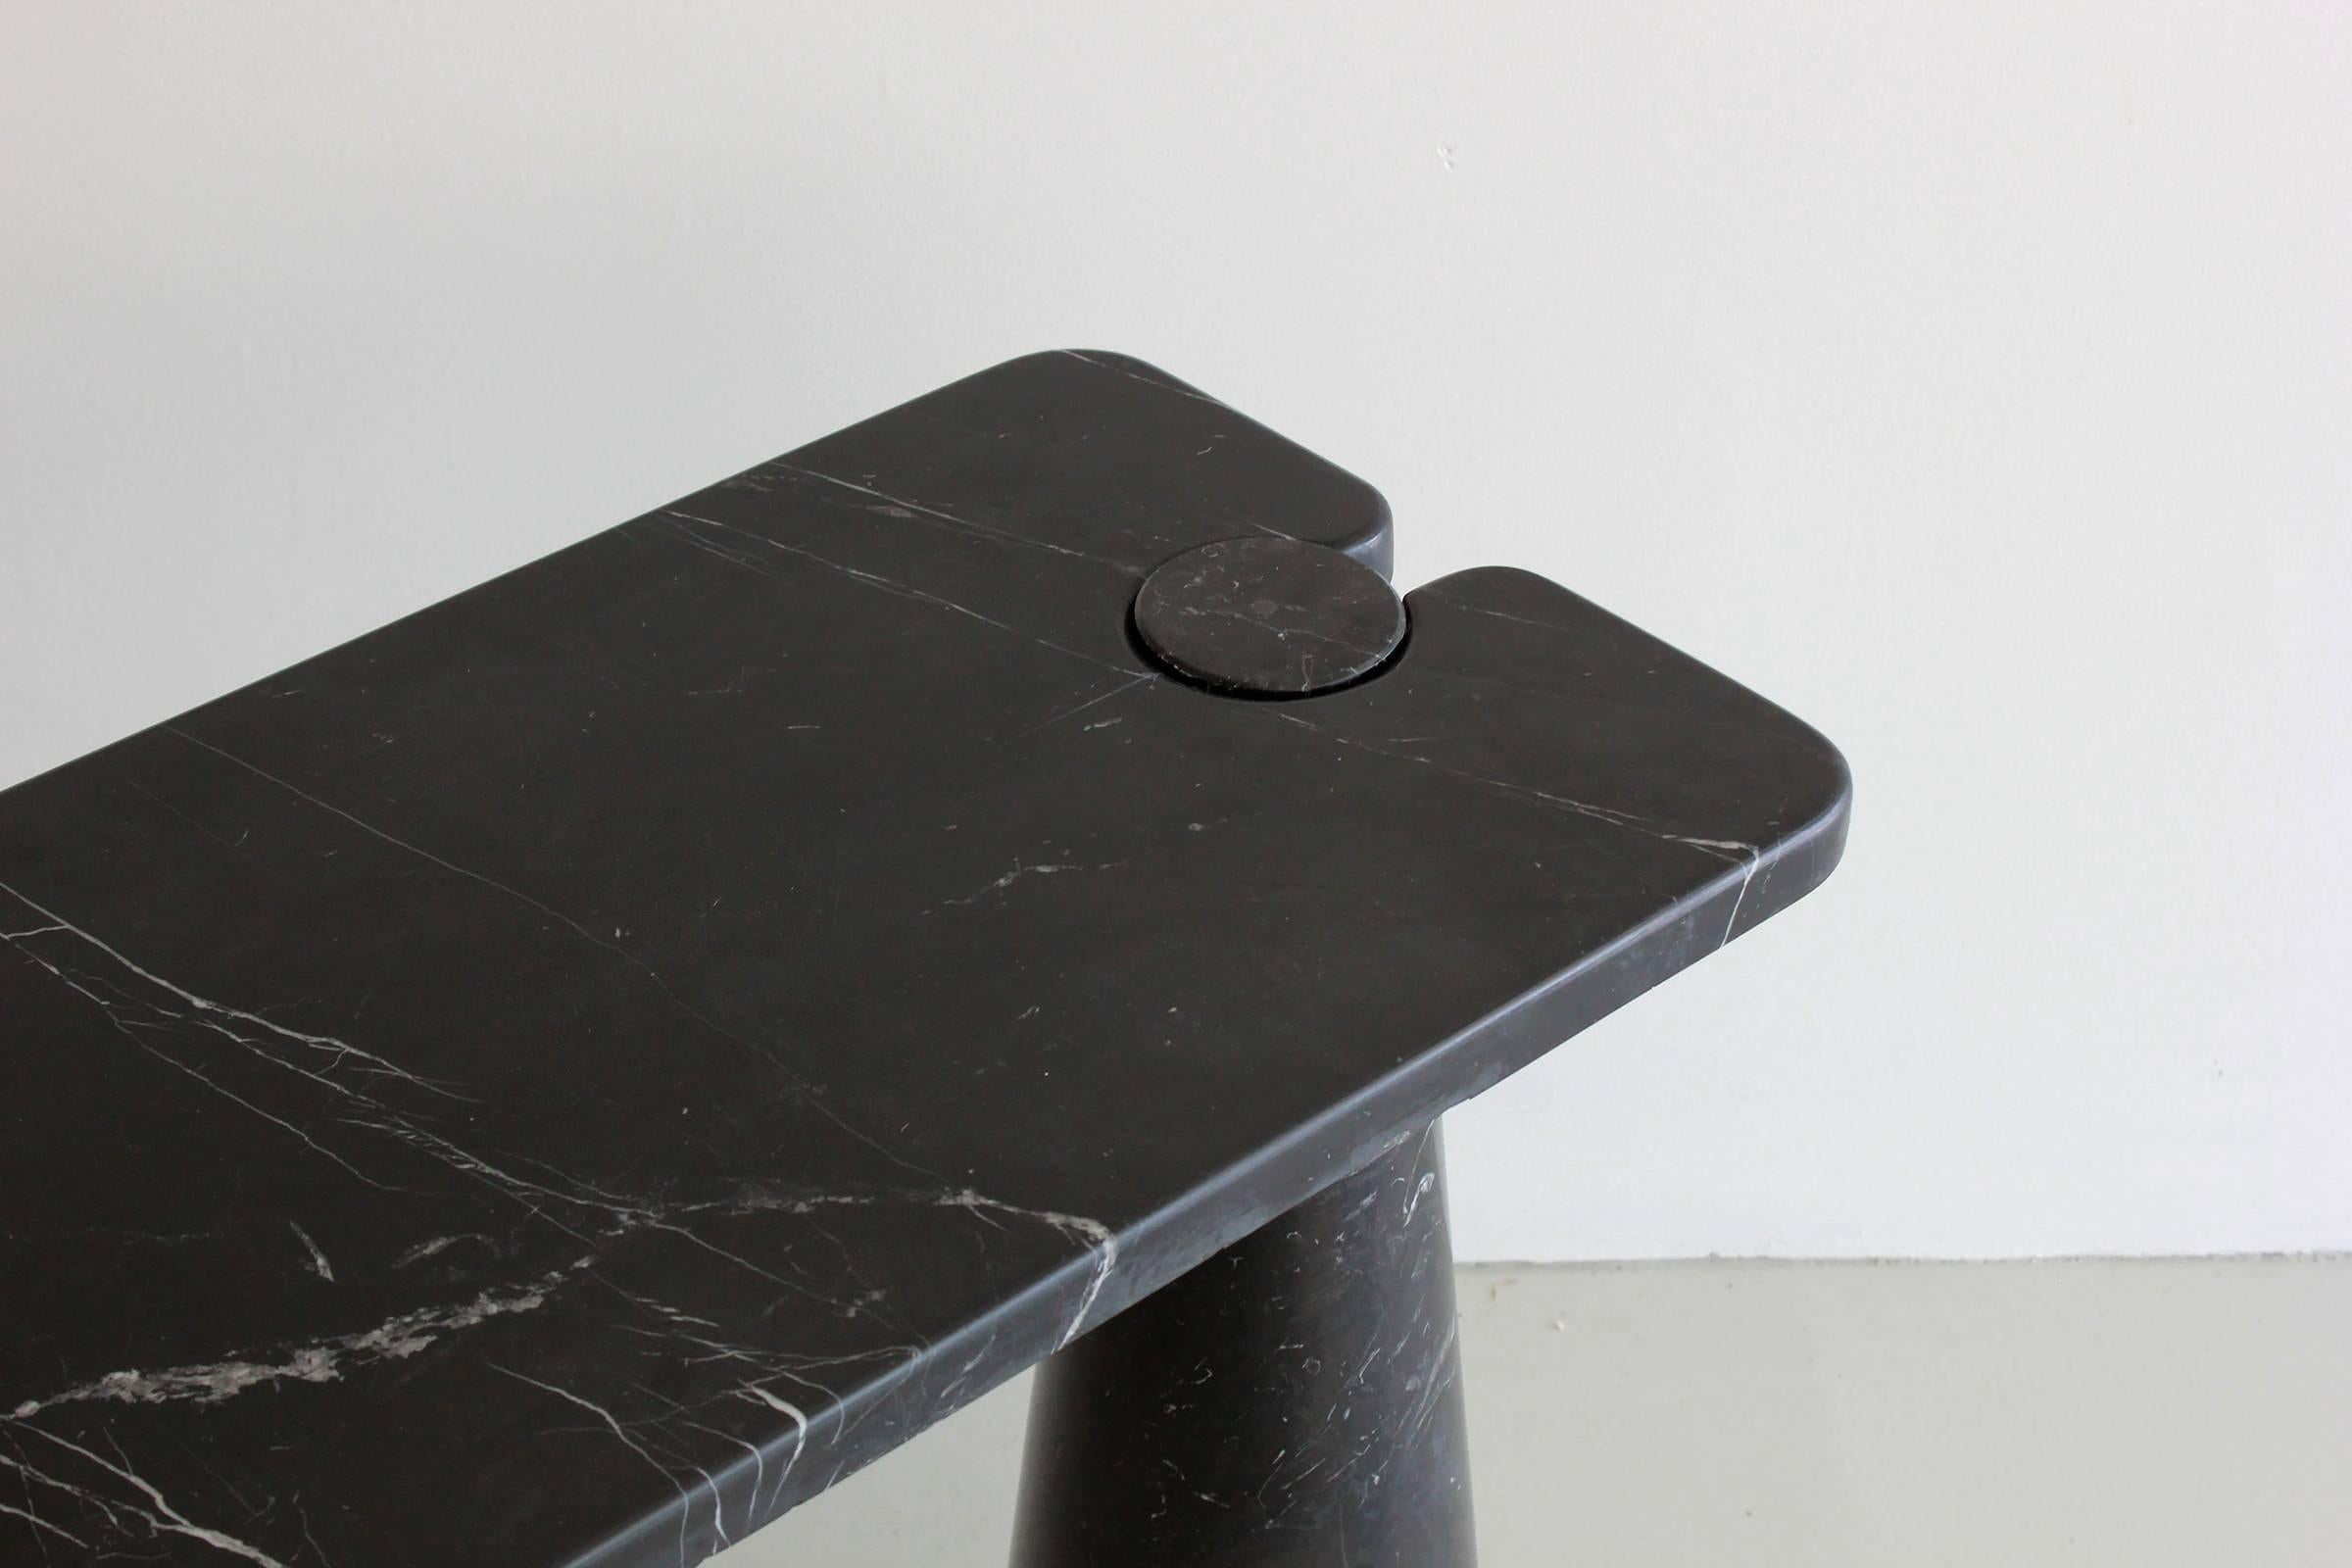 Gorgeous marble console from Mangiarotti’s Eros series. Beautiful black marble top held by two black marble conic pedestals with light white veining throughout.